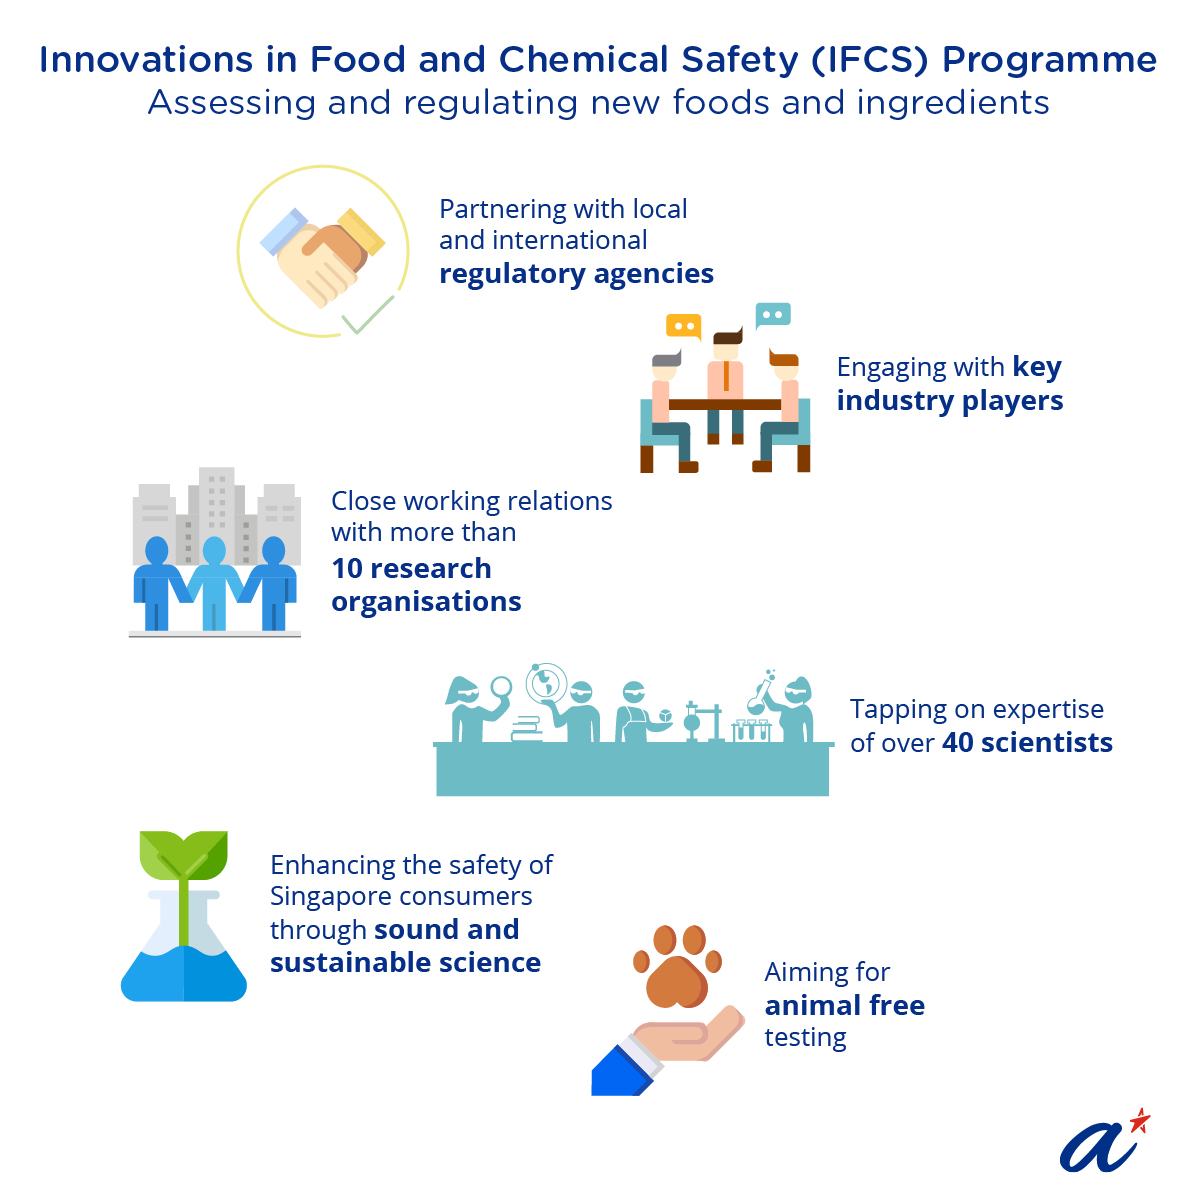 IFCS Programme Infographic